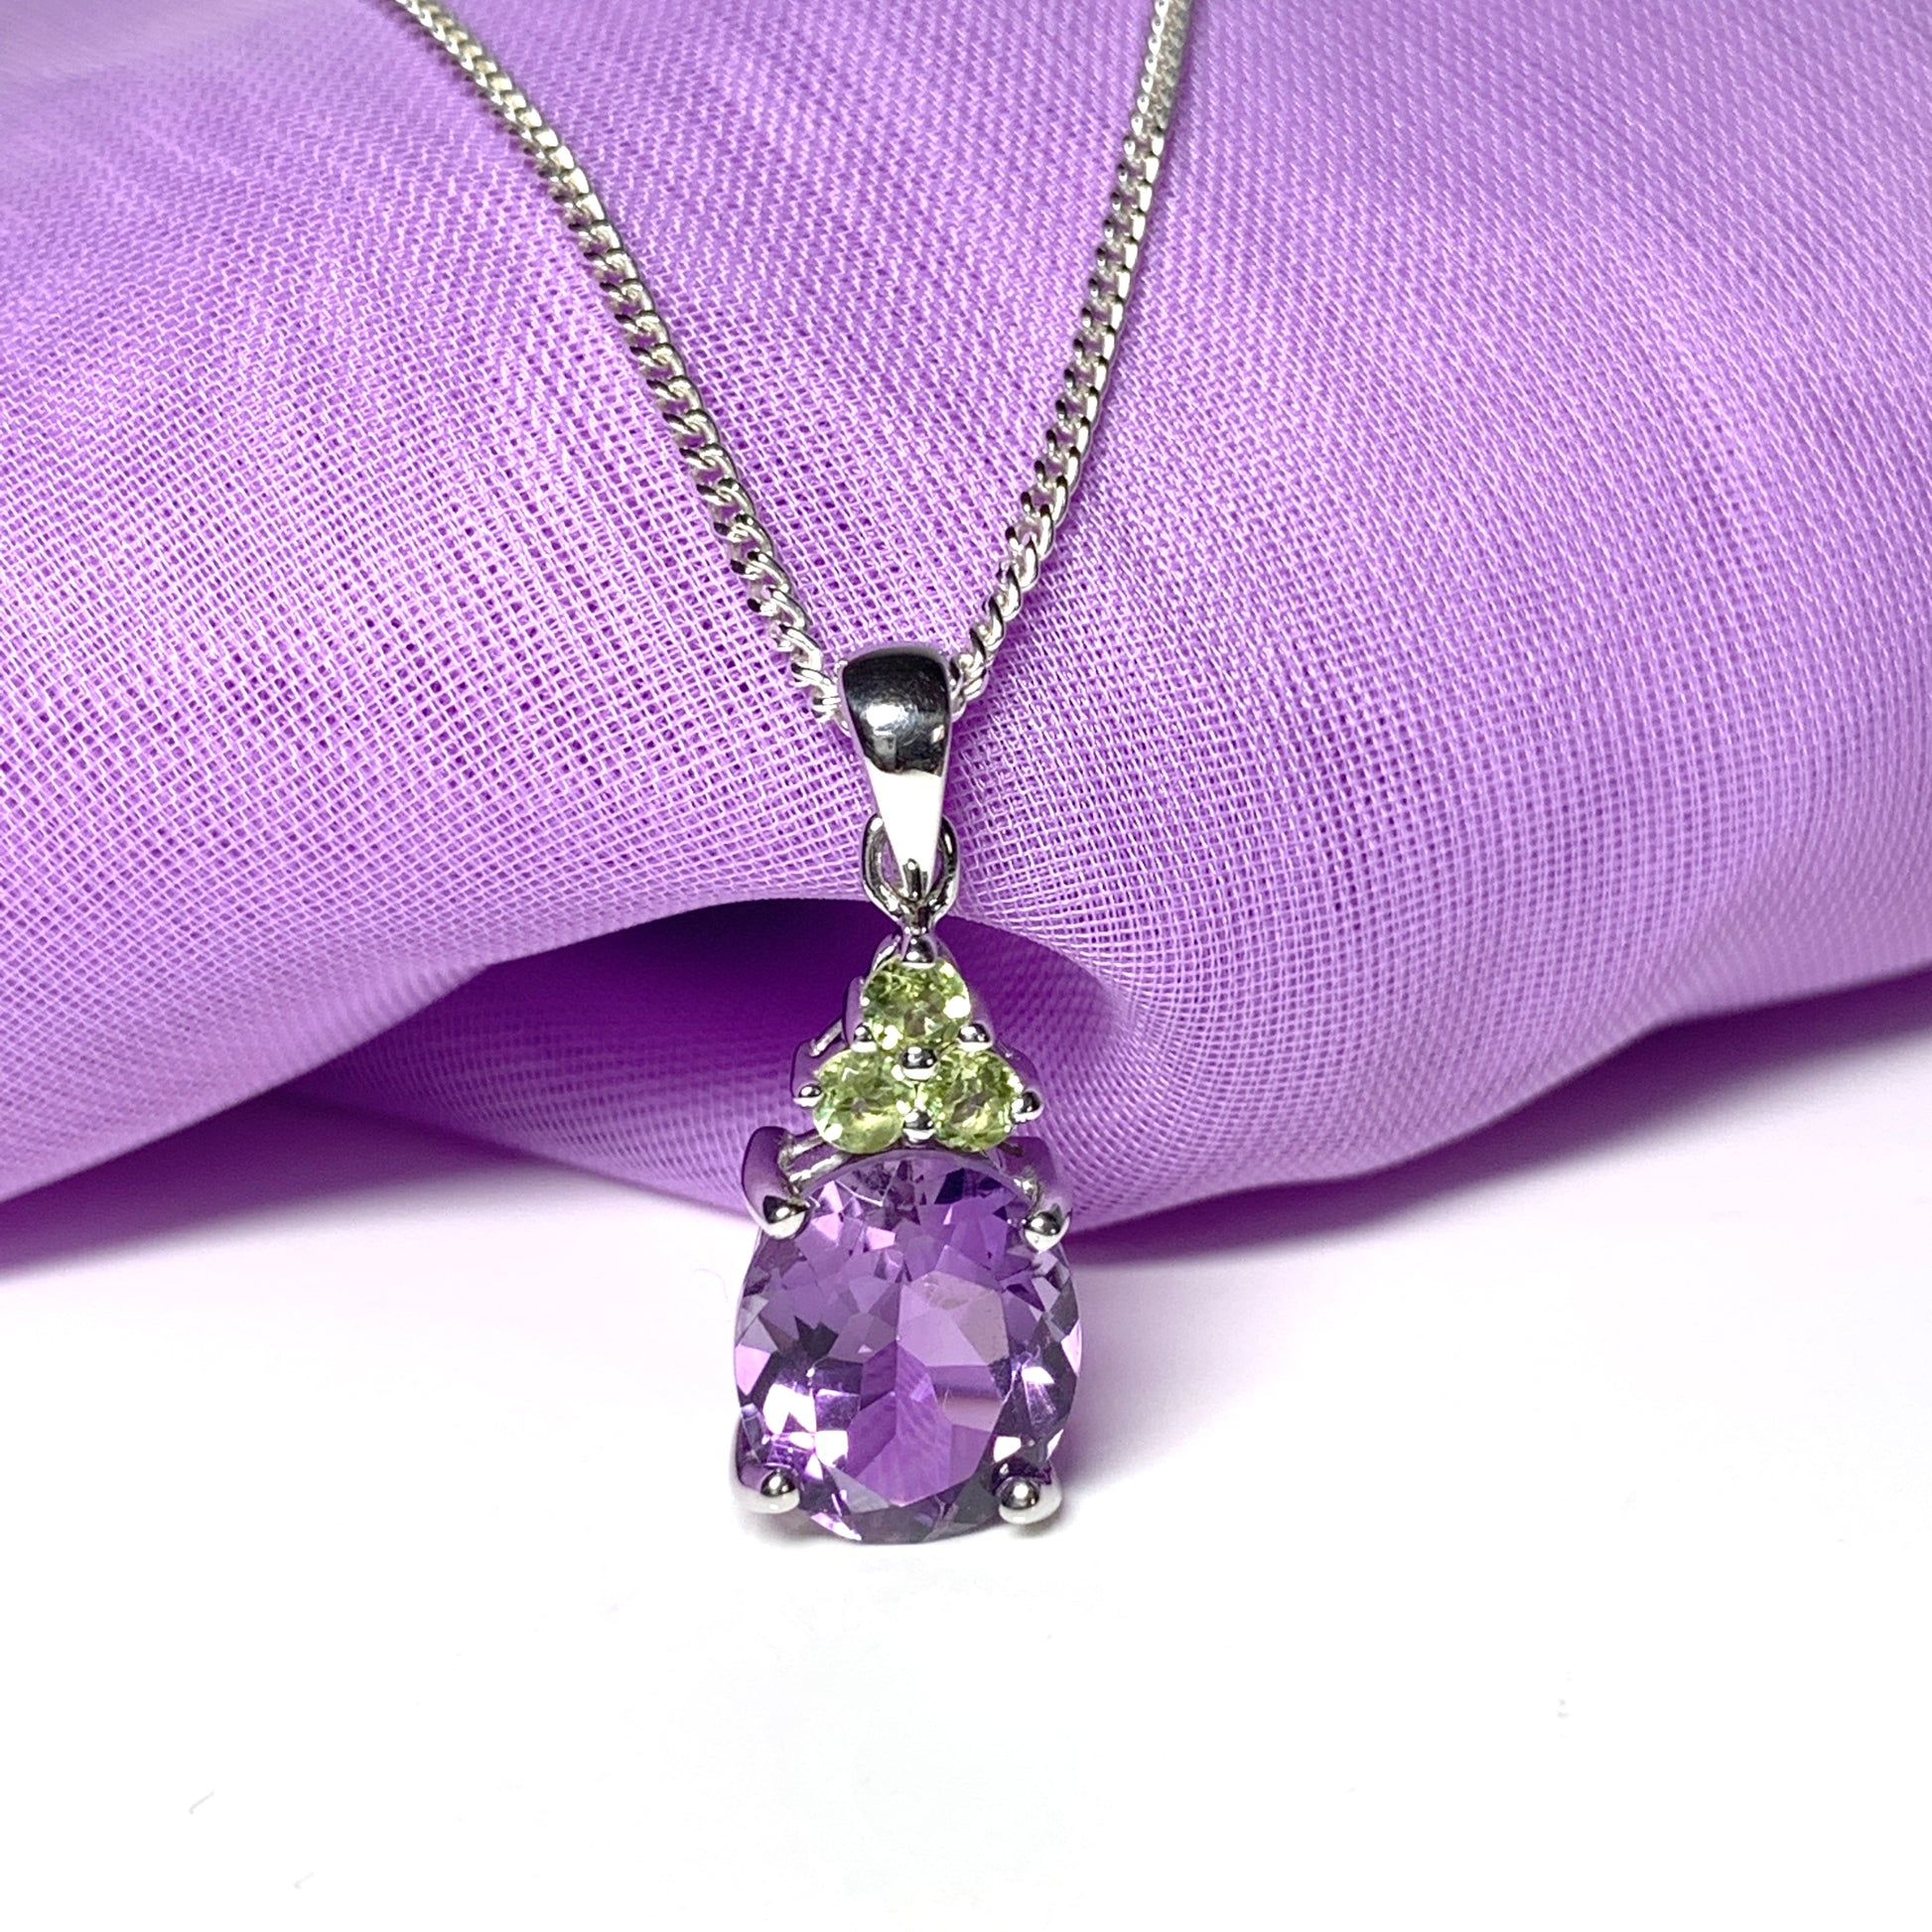 Real amethyst and peridot necklace sterling silver